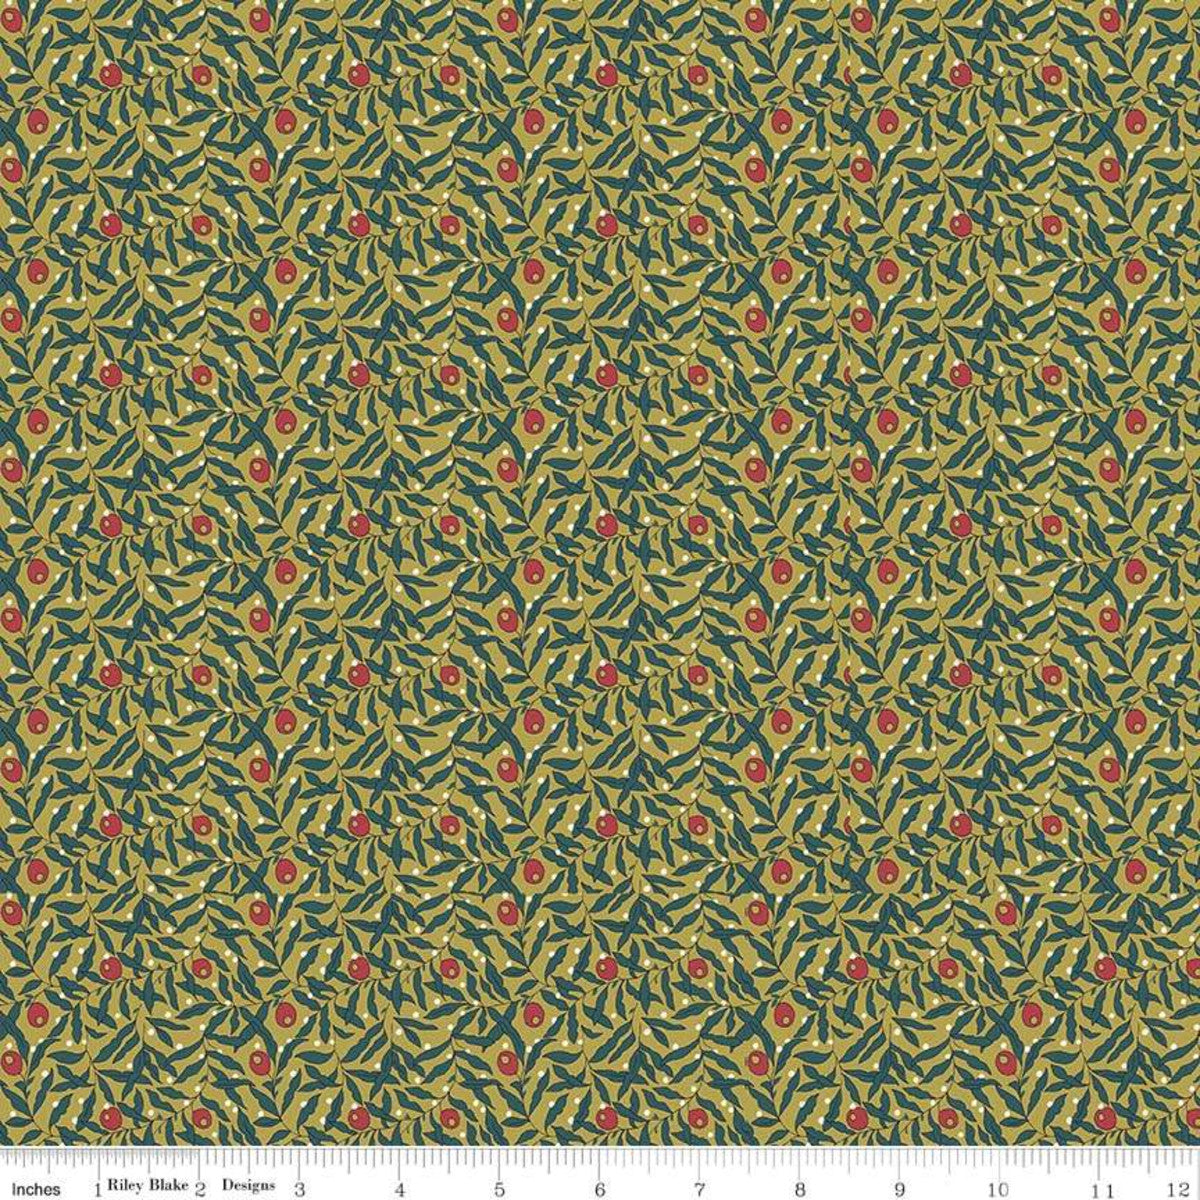 SG - Holiday Berries POS Fabric - Trapunto